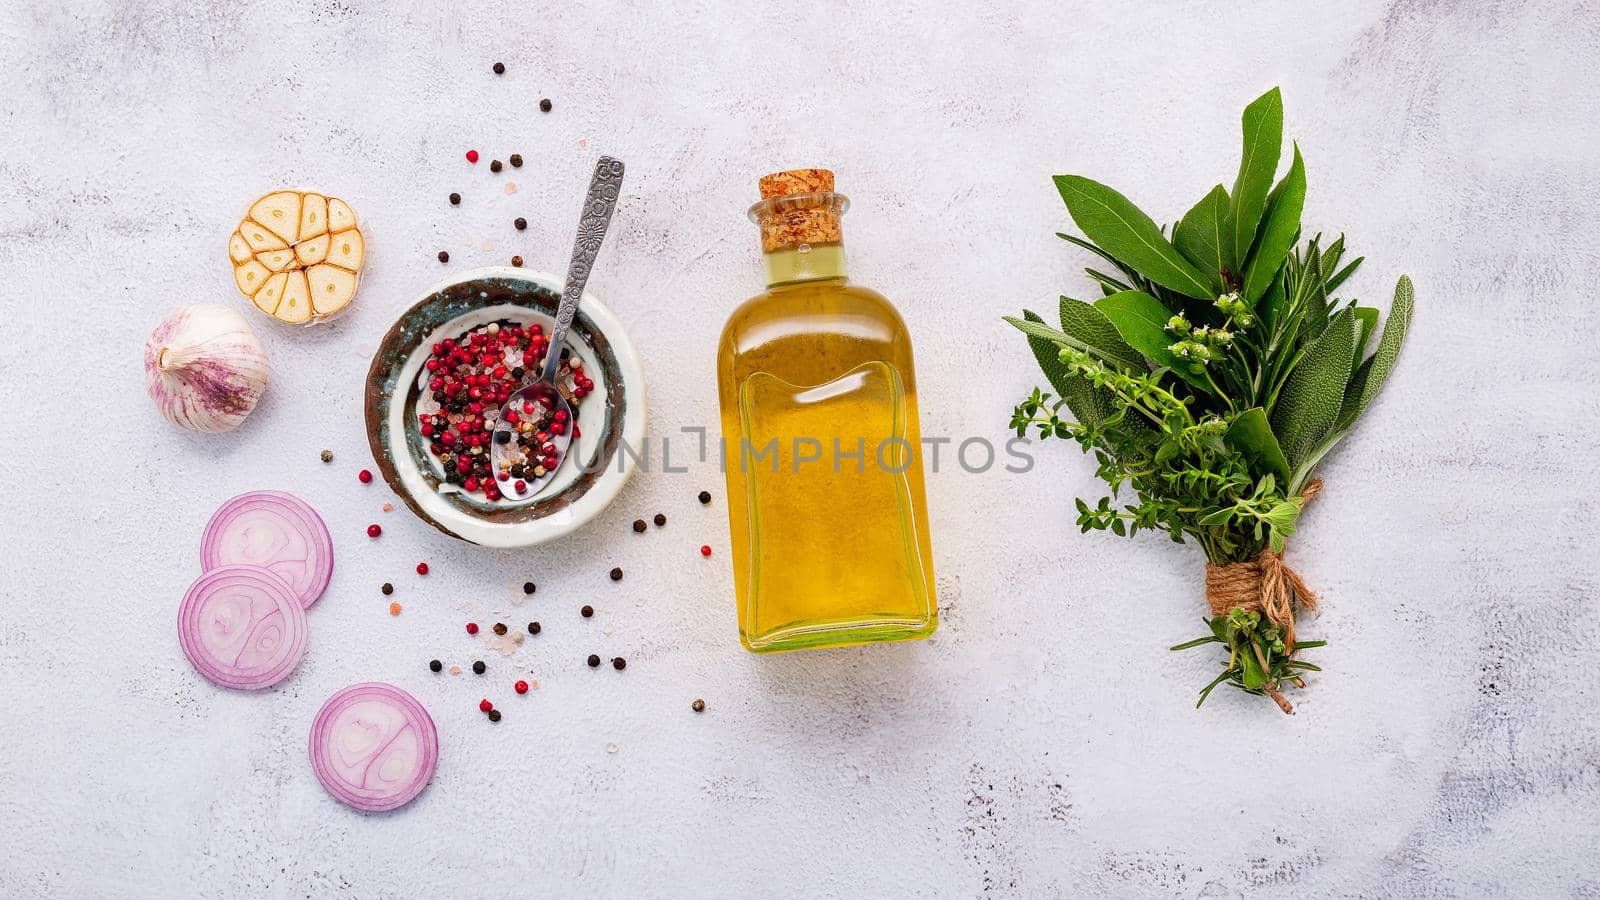 Ingredients for steak seasoning in ceramic bowl set up on white concrete background with copy space. by kerdkanno